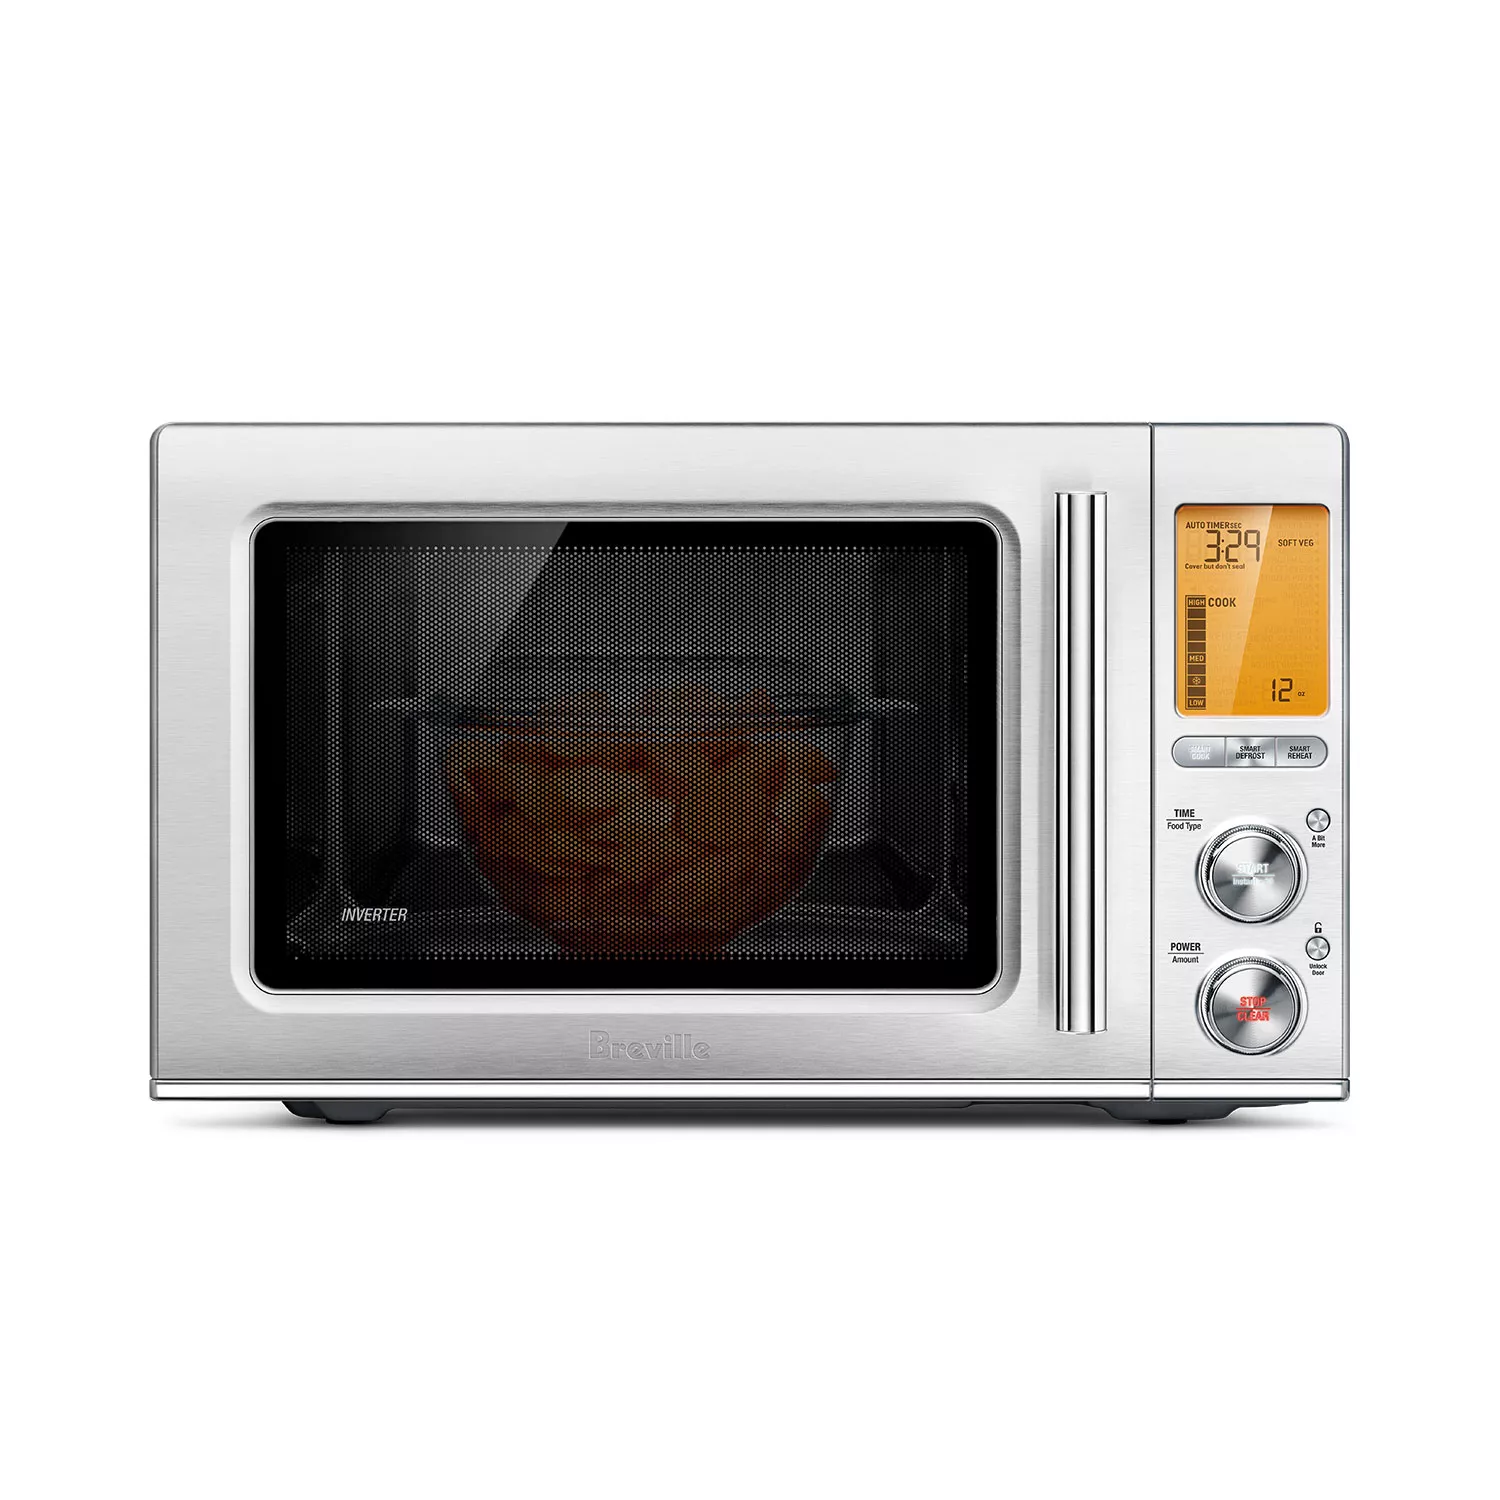 Breville the Smooth Wave™ Microwave